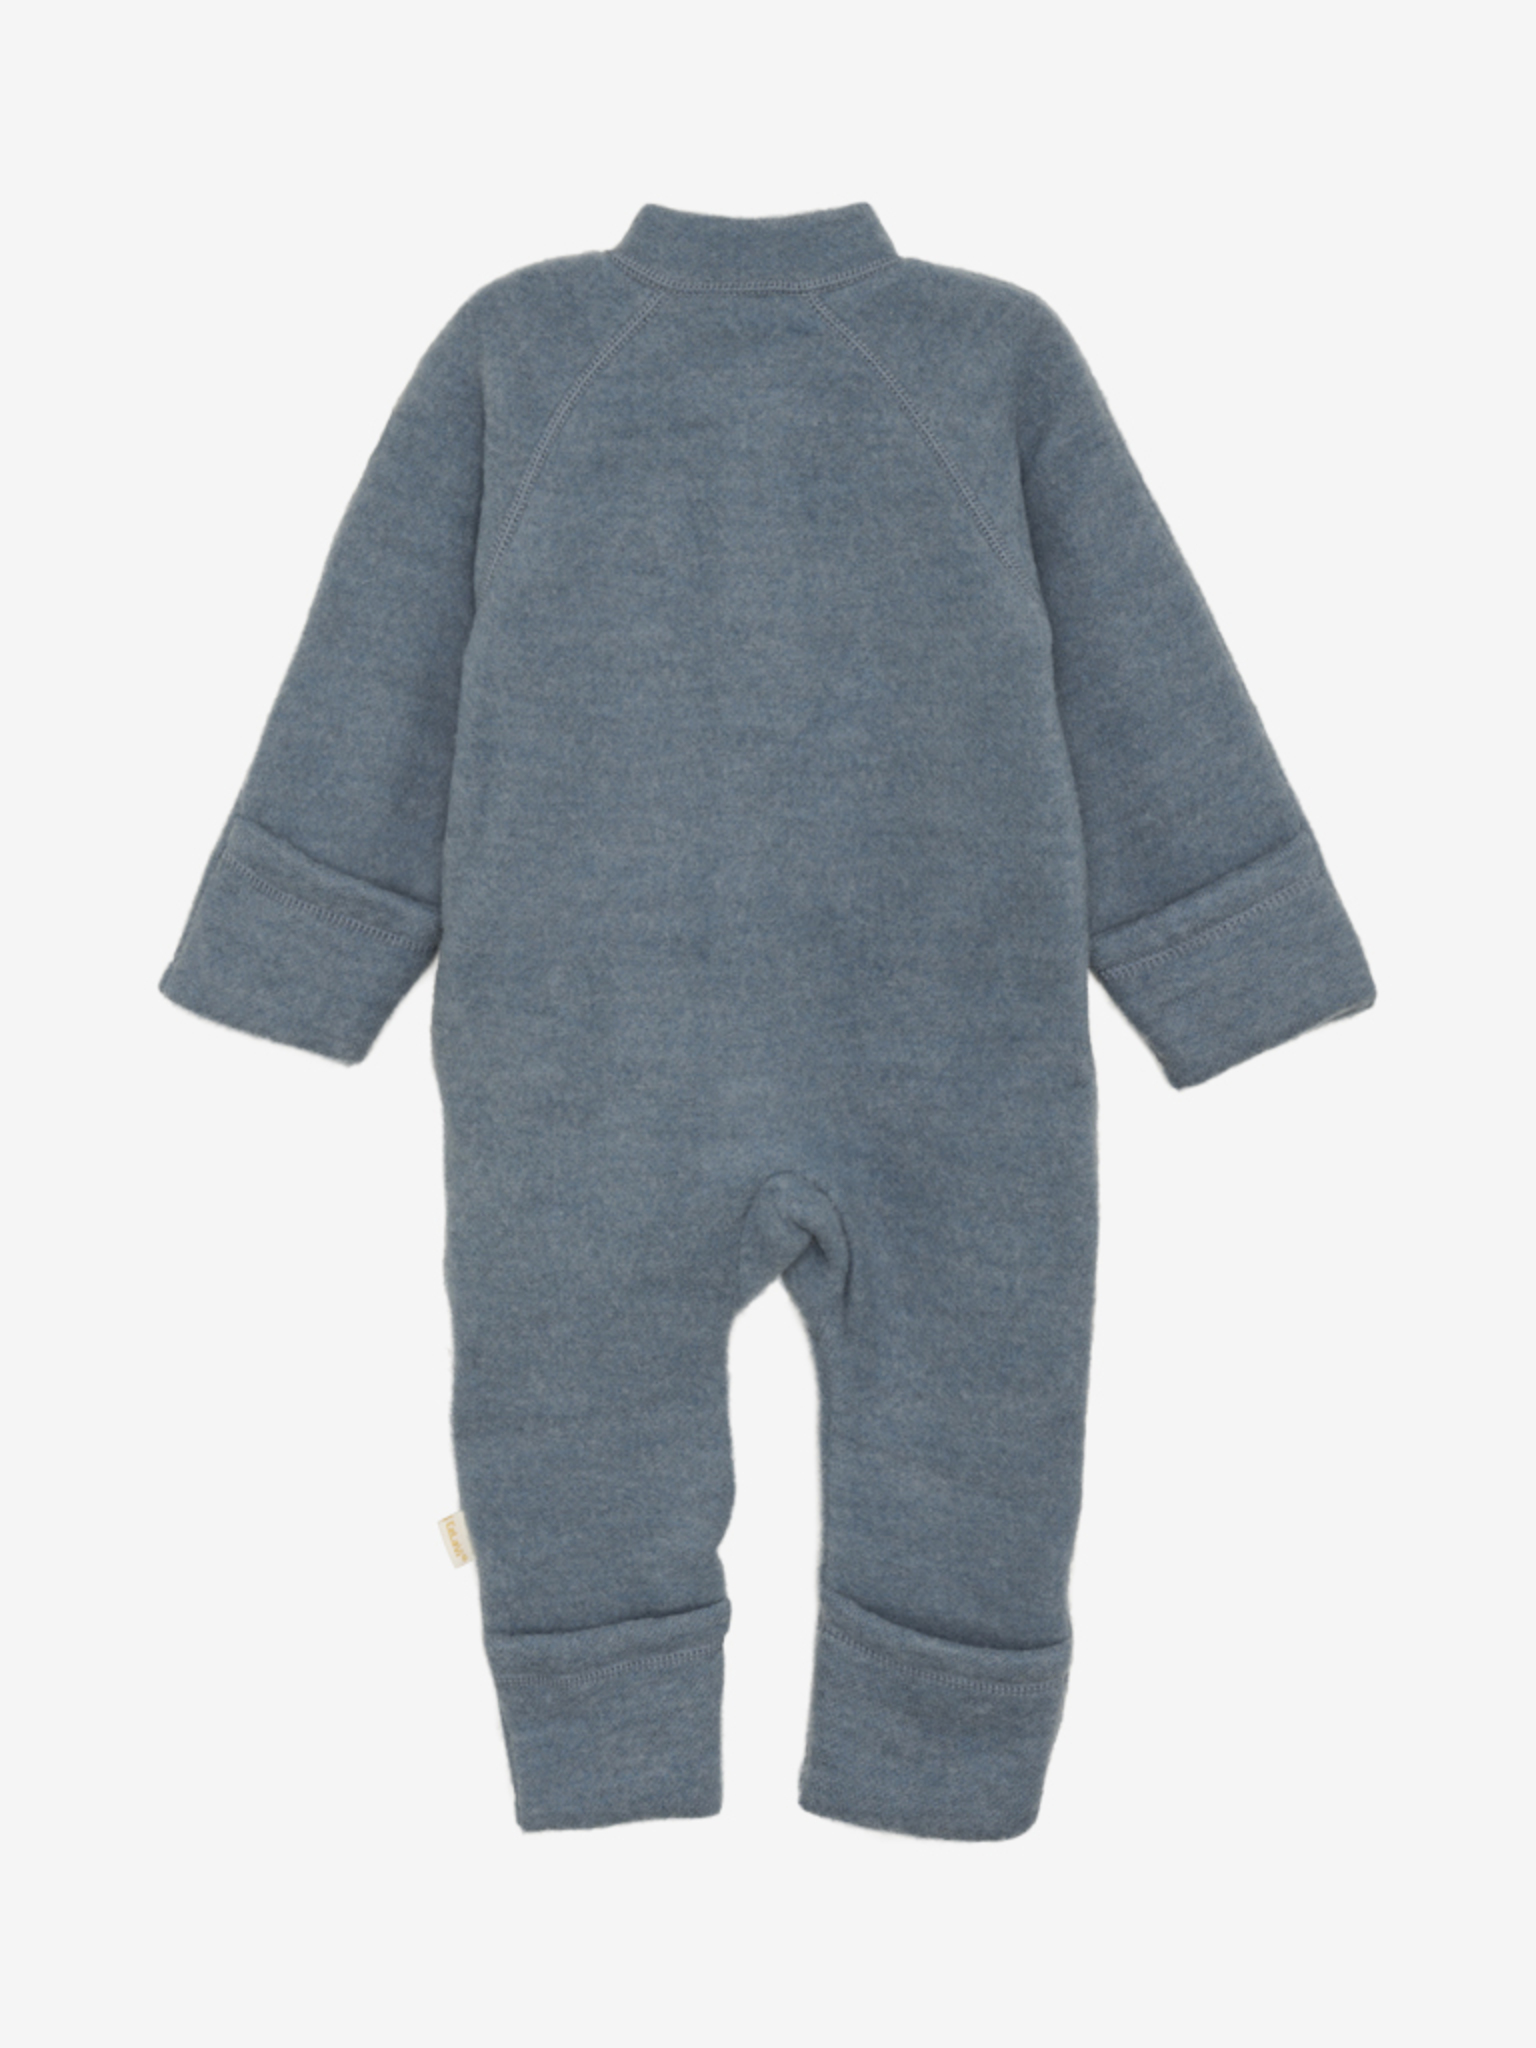 CeLaVi - Soft Wool/ Ull - Jumpsuit- Stormy Weather